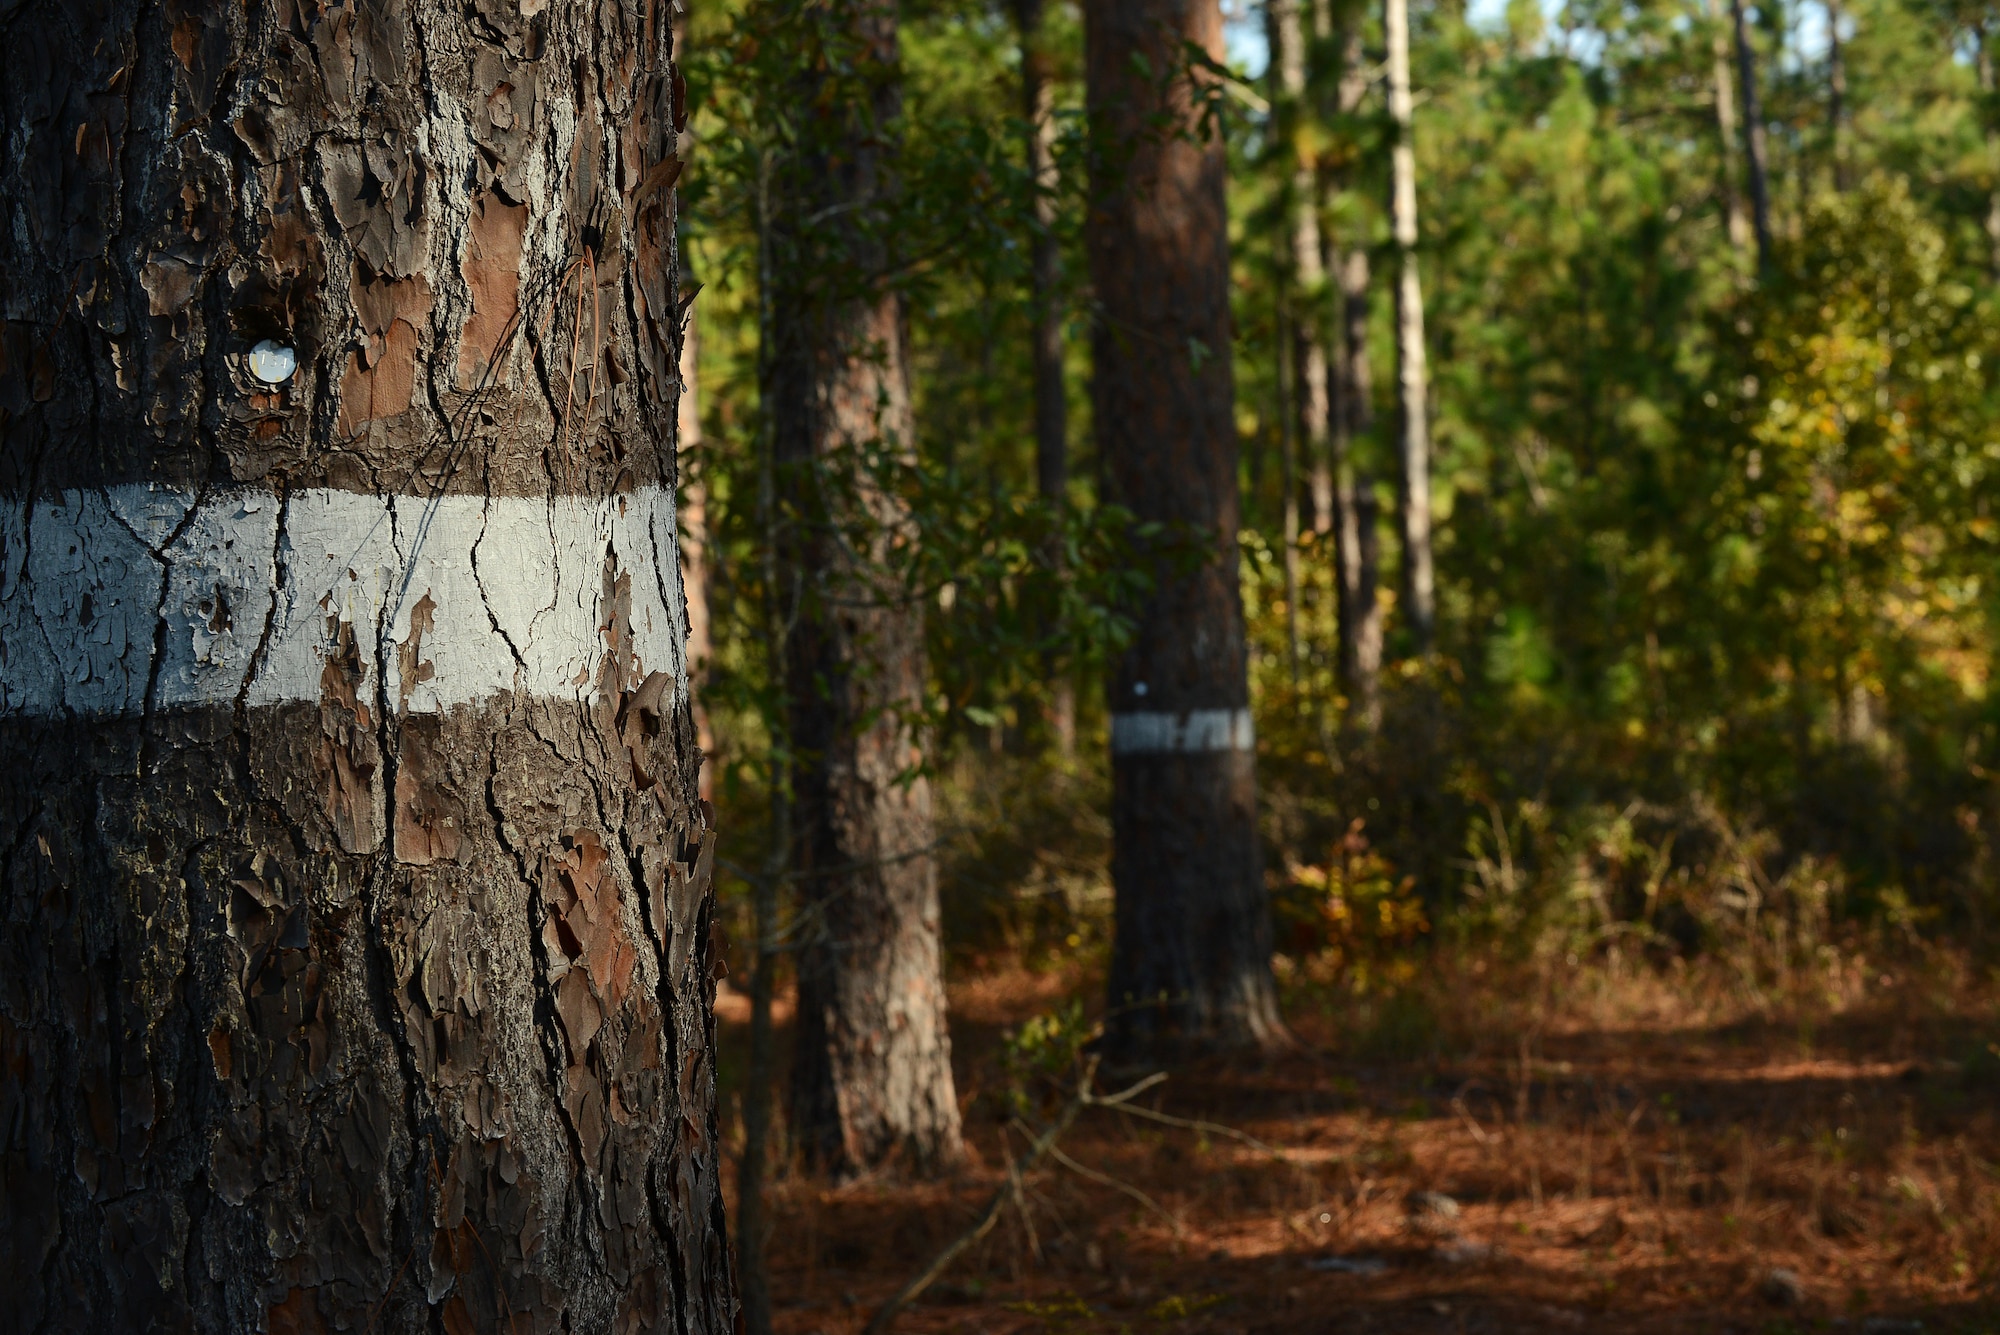 White lines were painted on trees and marked with numbers at Poinsett Electronic Combat Range, Sumter, S.C., Oct. 28, 2014. The white lines signify there is a Red-cockaded Woodpecker, an endangered species, cavity in the tree. (U.S. Air Force photo by Airman 1st Class Diana M. Cossaboom/Released)